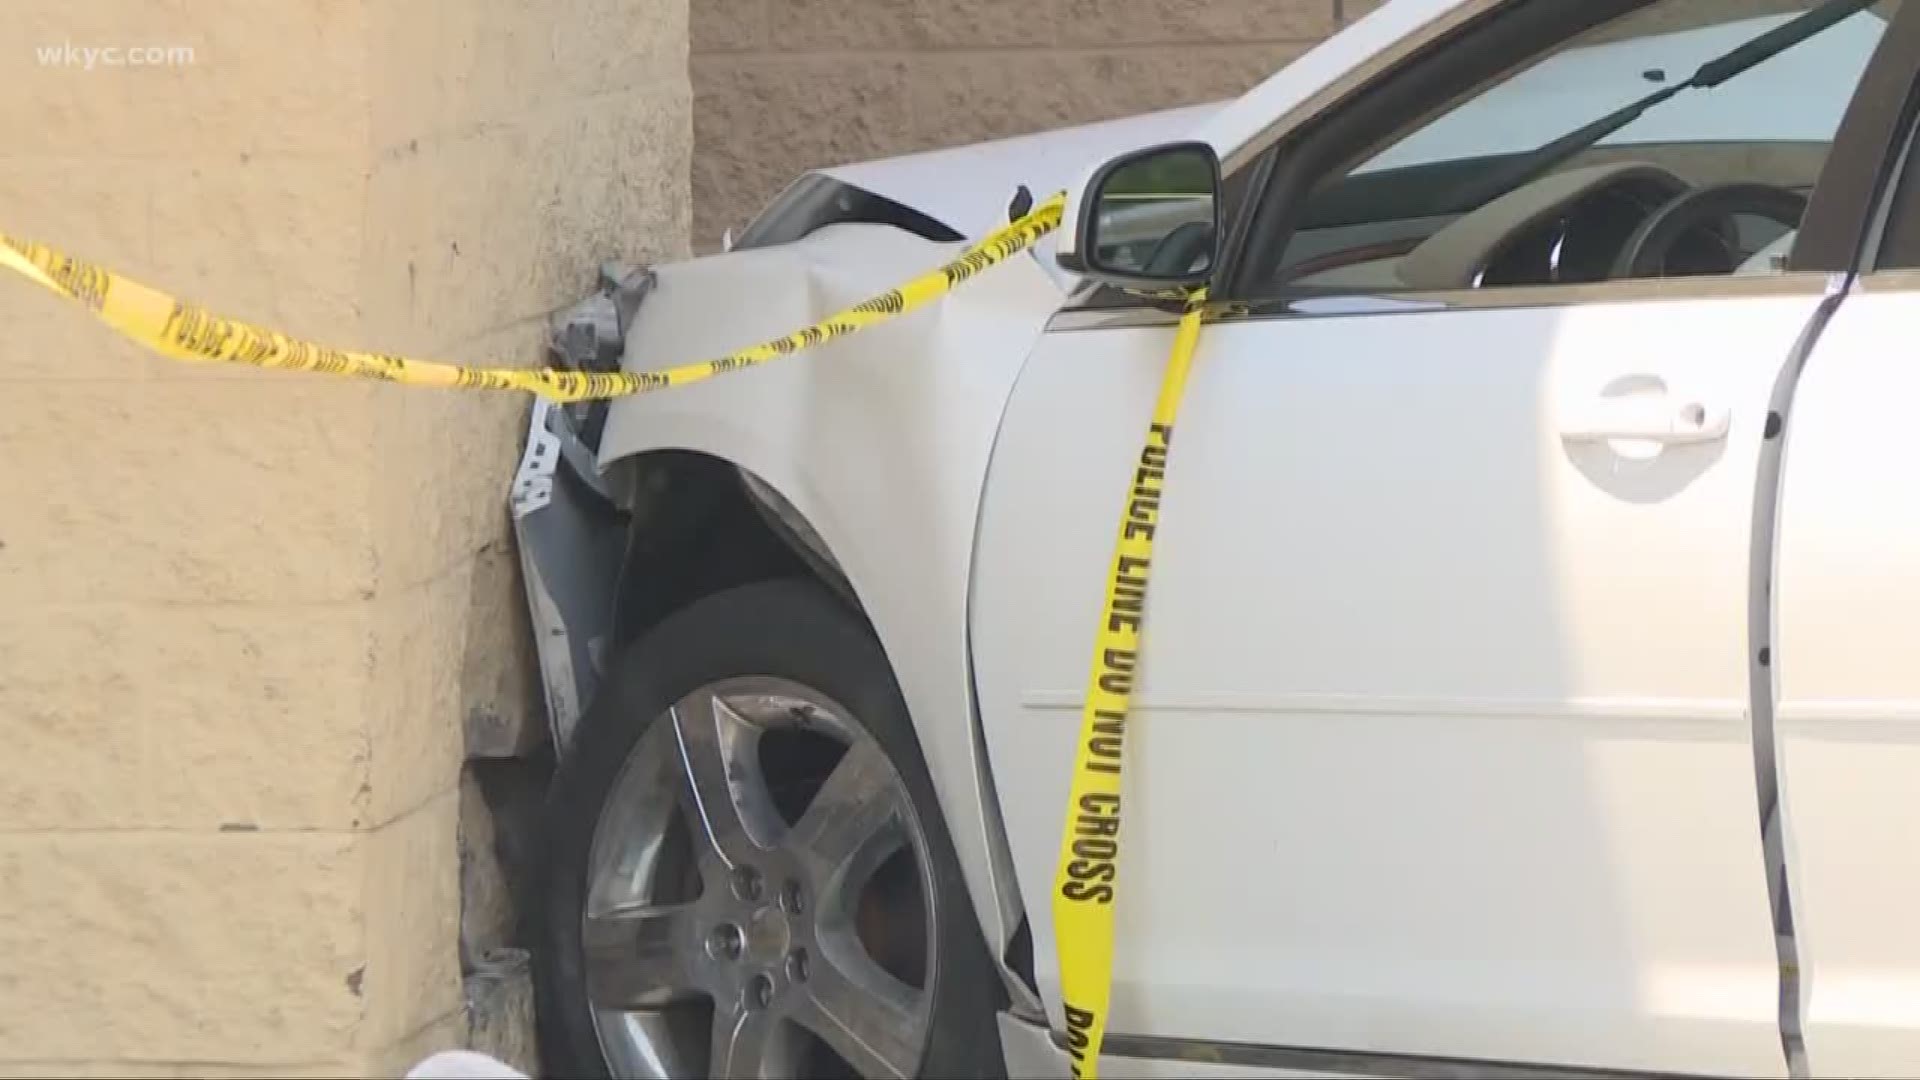 Couple happy to be alive after elderly driver hits pedestrians, crashes into Mentor Walmart